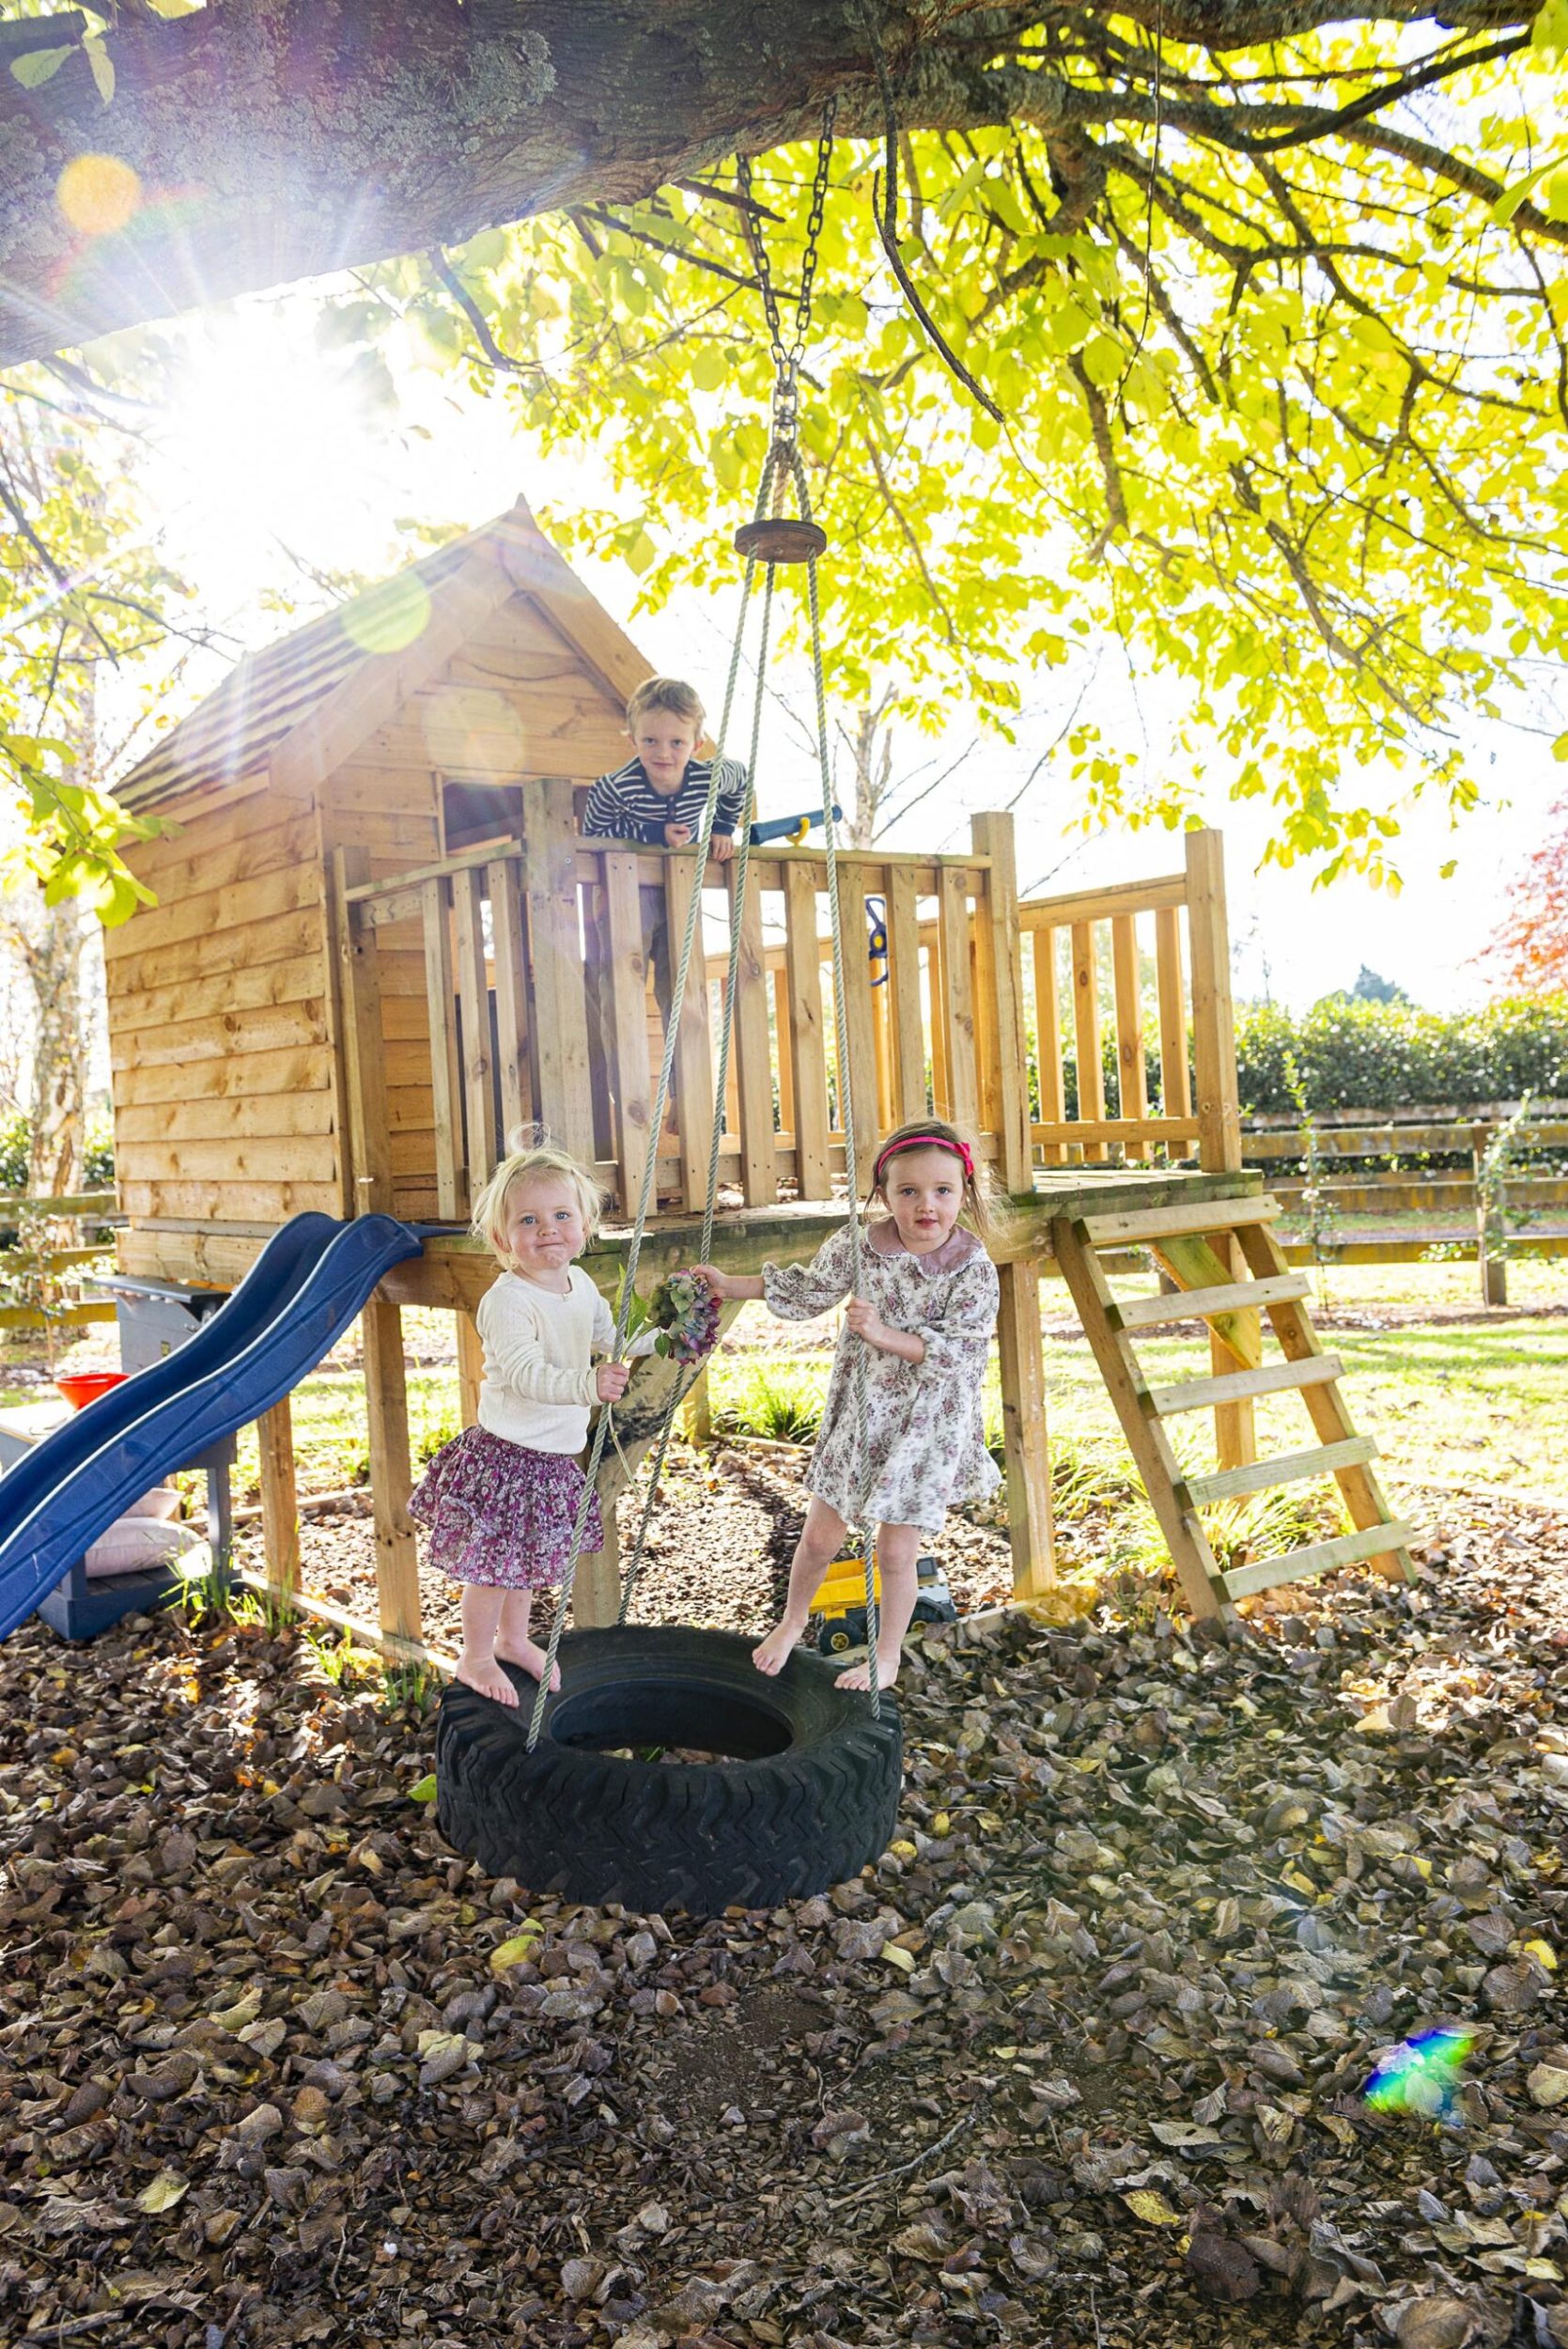 Two young girls playing on a tyre swing while a young boy looks out from a wood playhouse